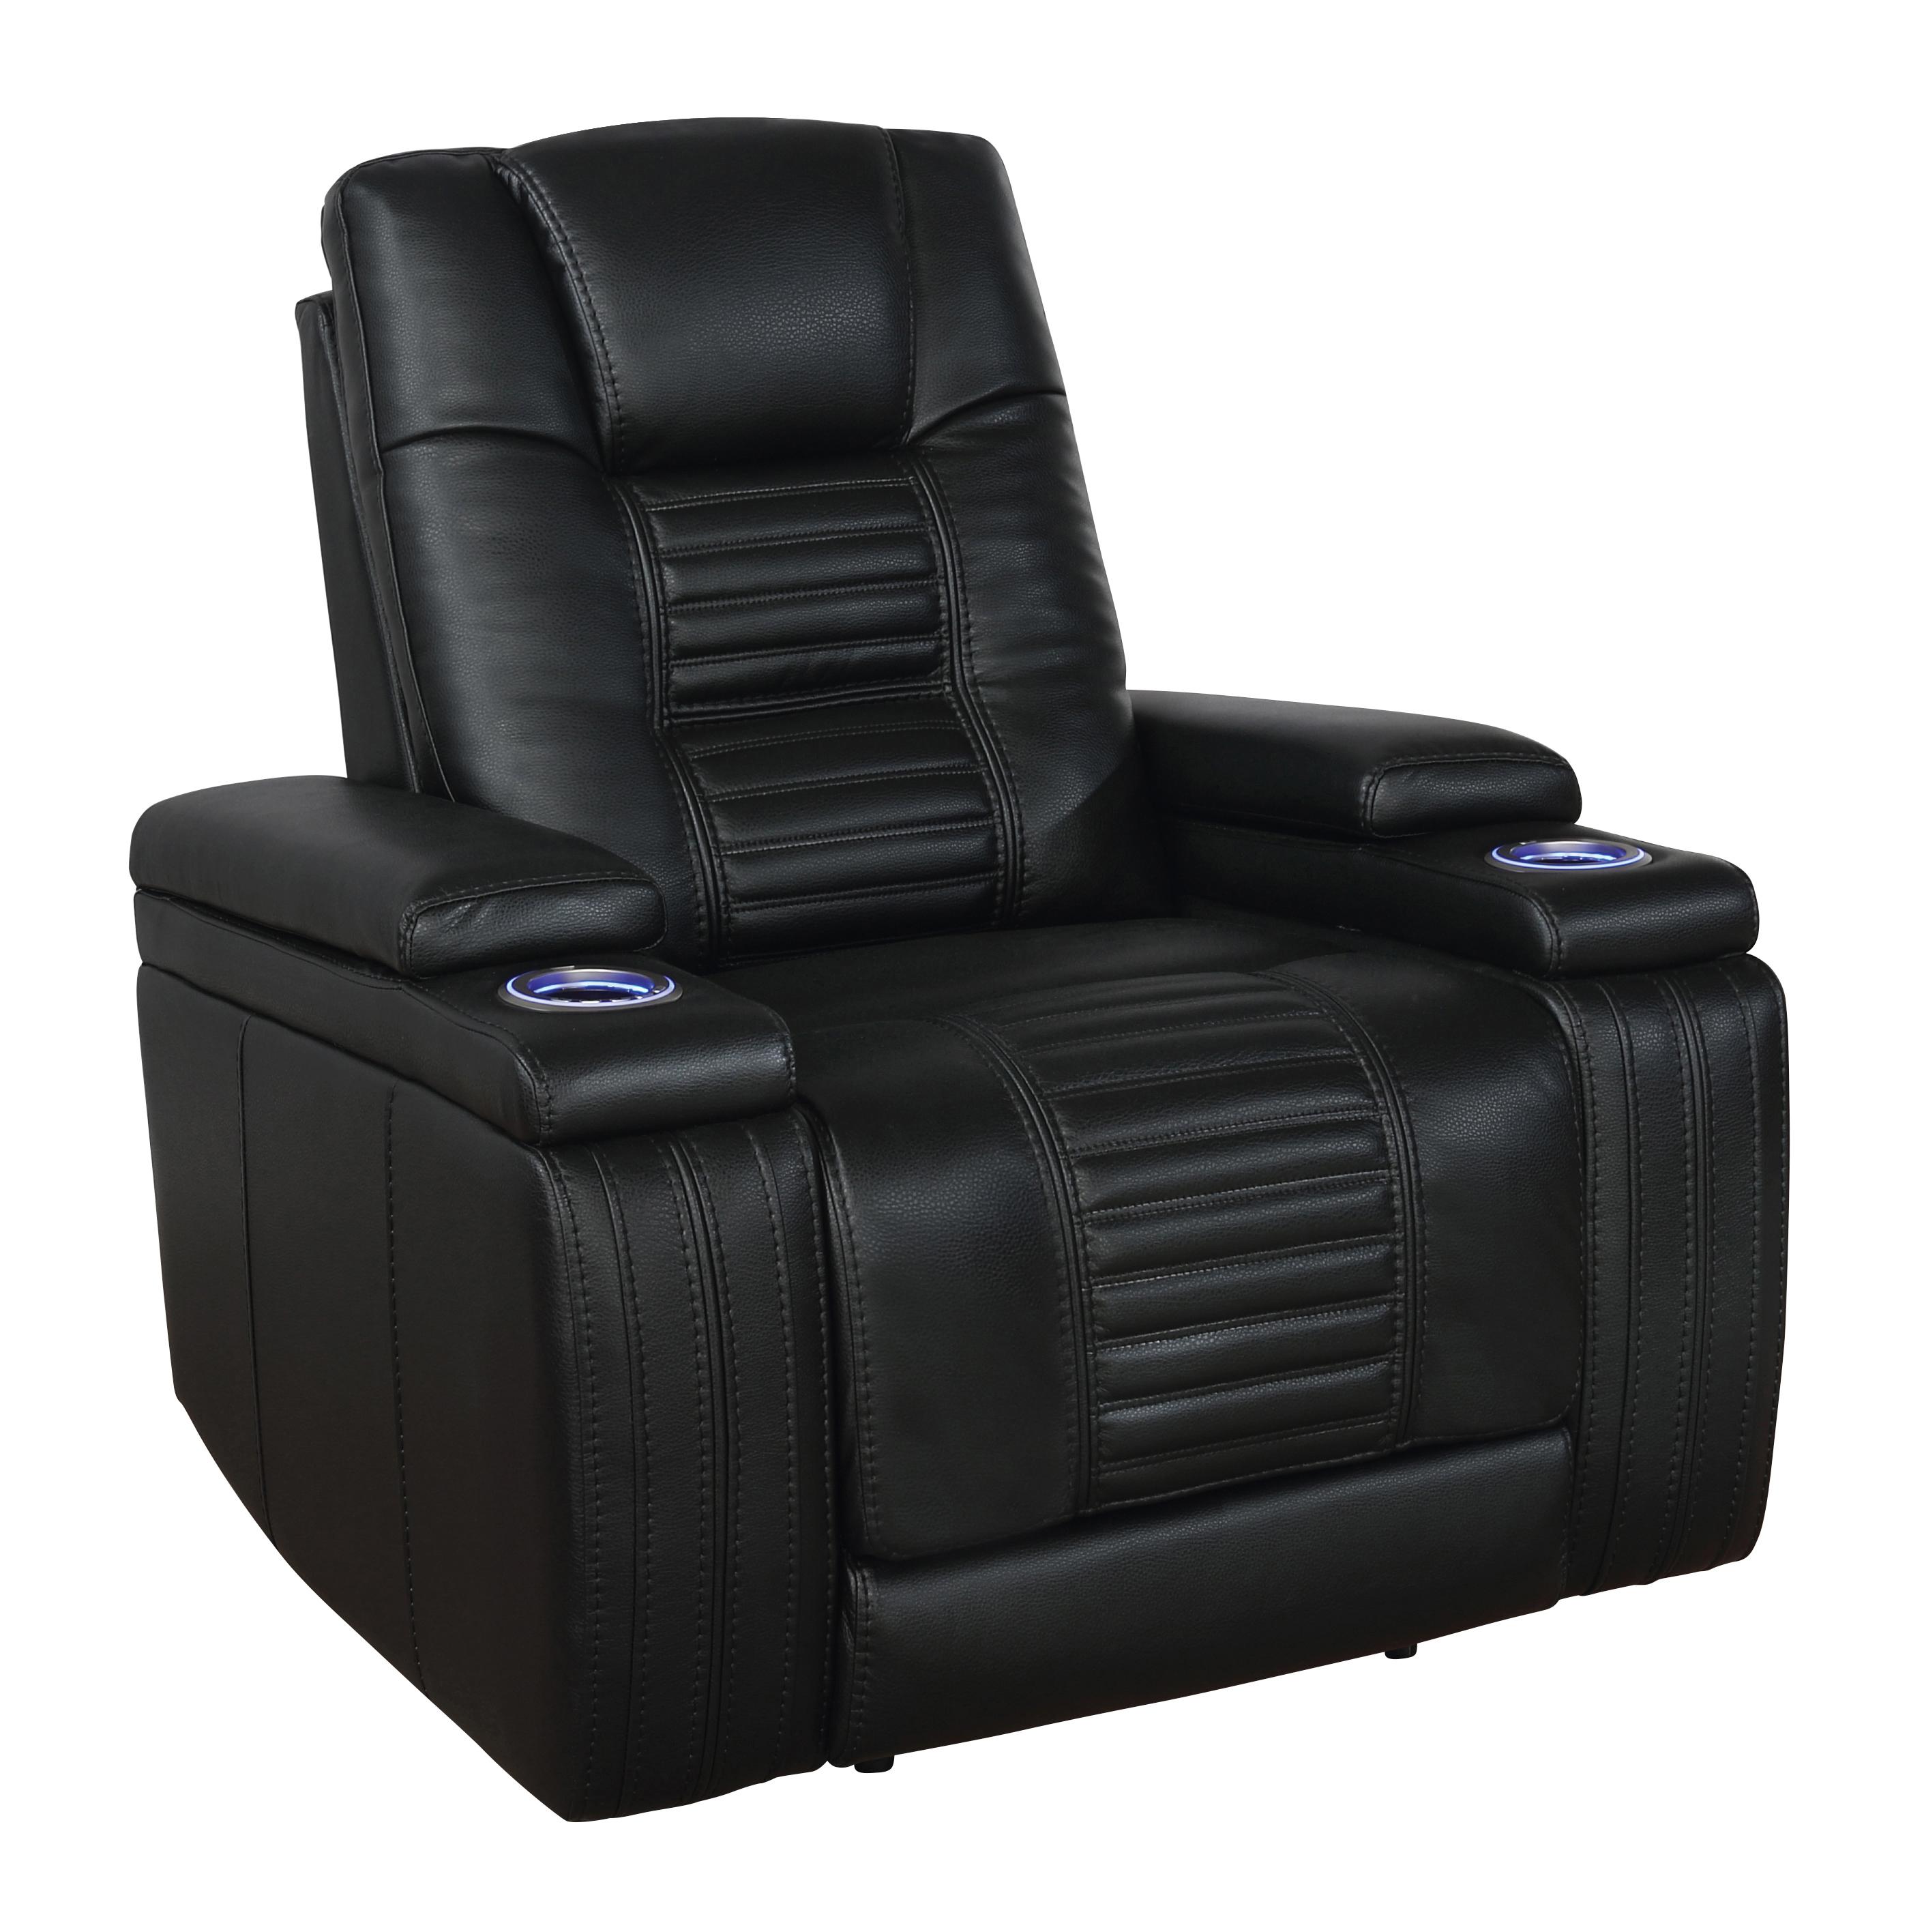 Contemporary Power recliner 651303PP Zane 651303PP in Black Leatherette